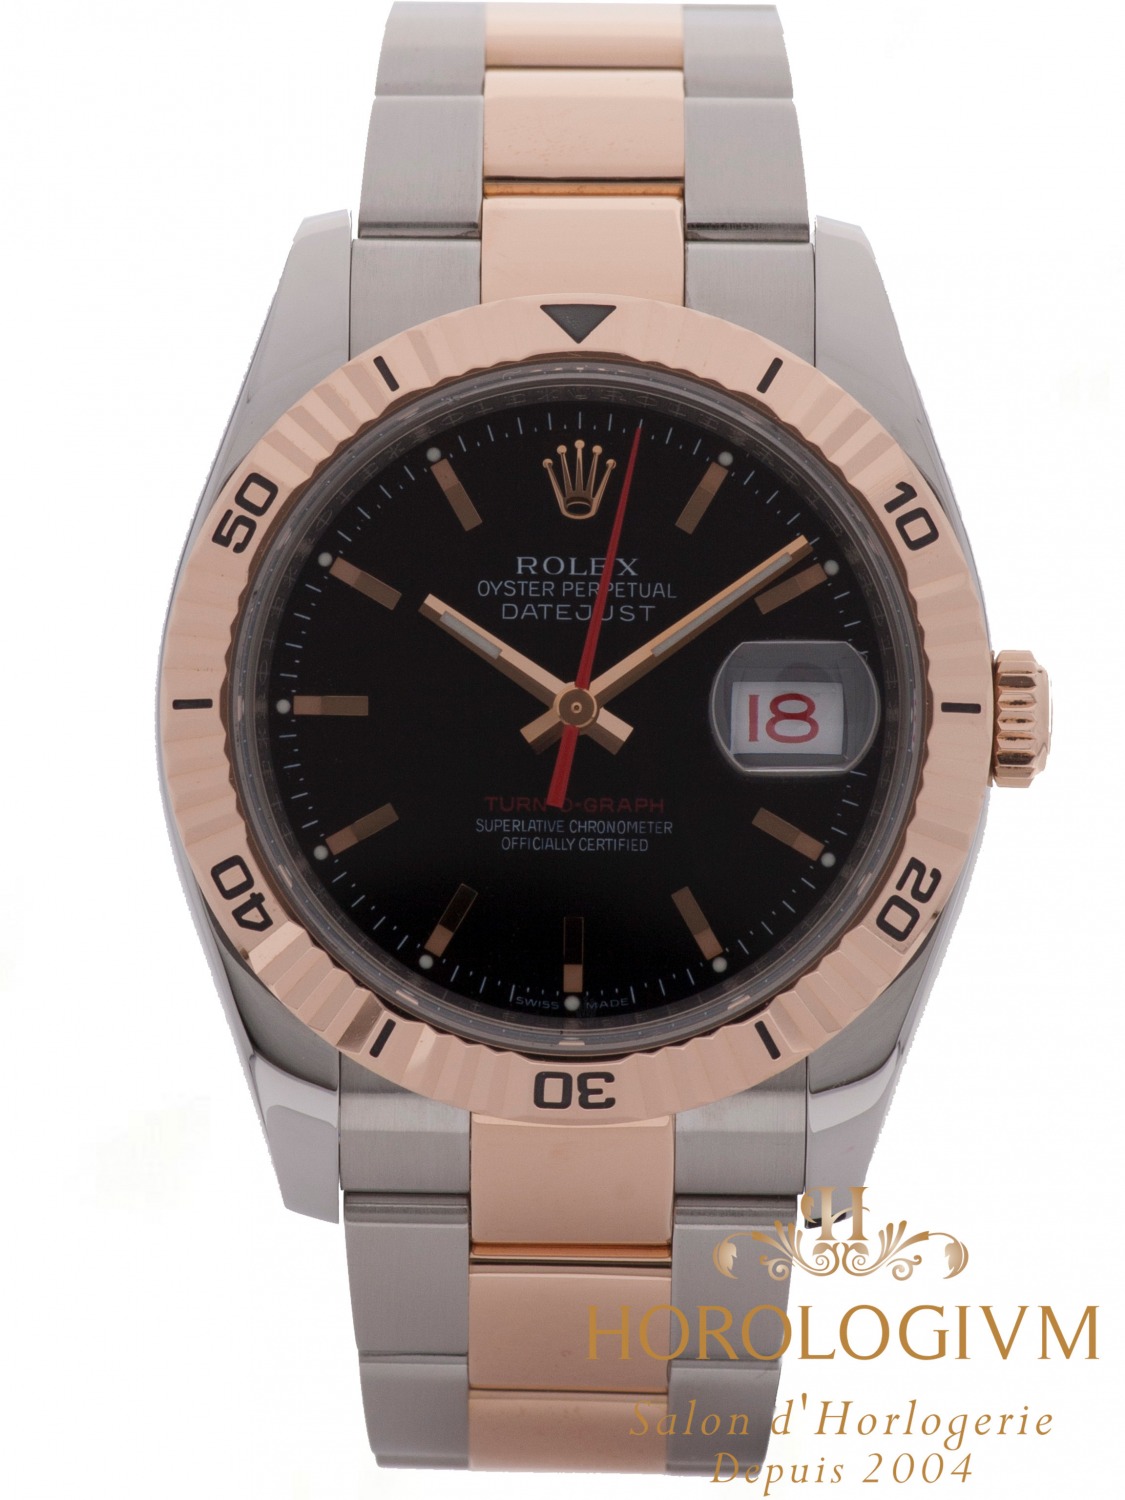 Rolex Datejust Two-Tone Turn-o-Graph 36MM watch, two-tone (bi-colored) silver and red gold